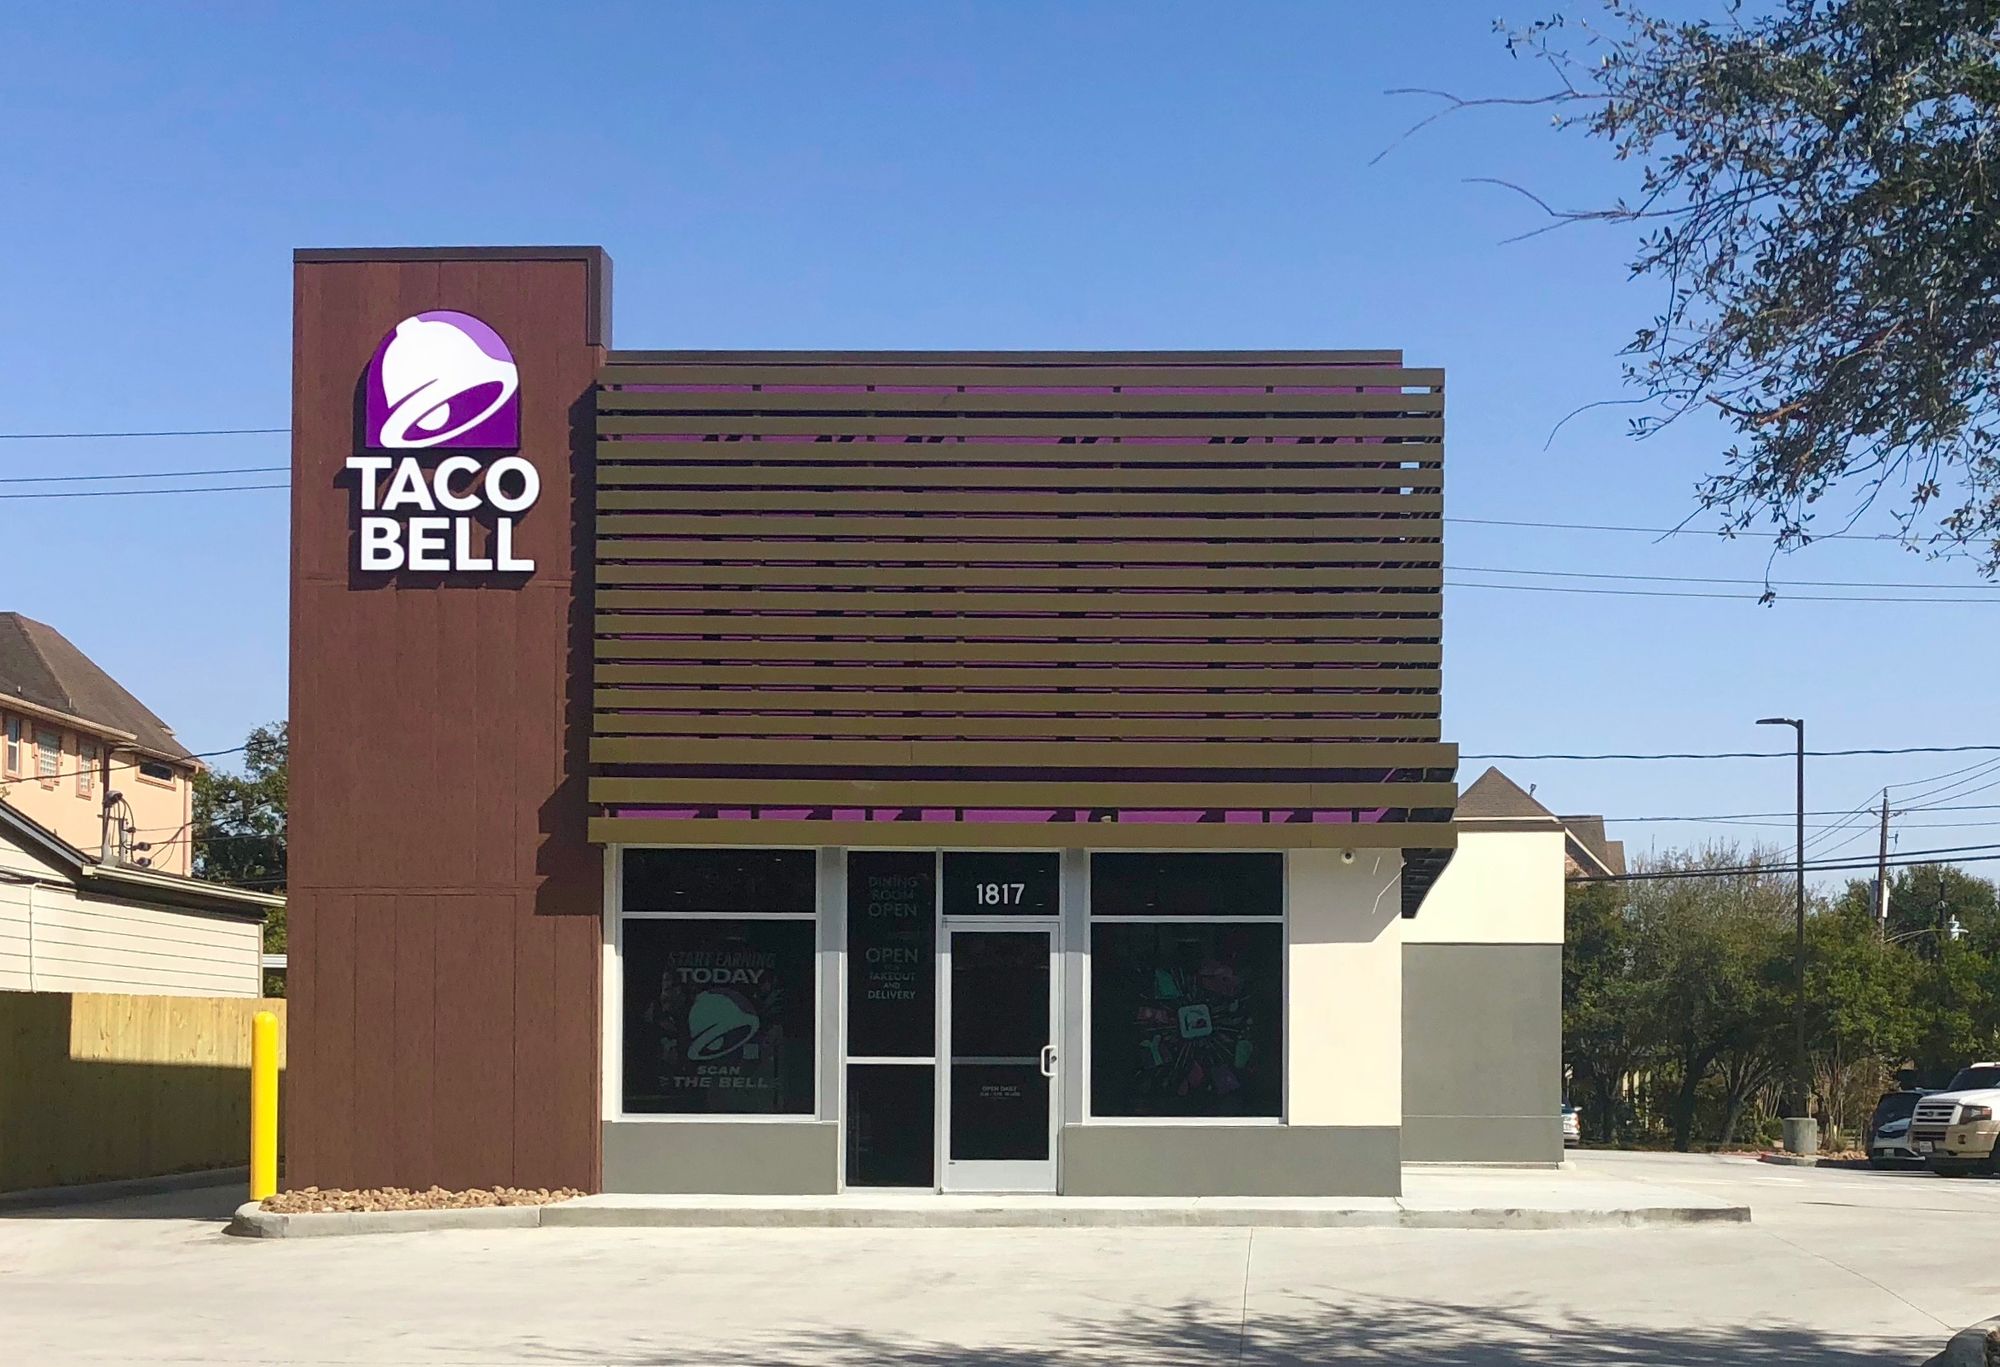 Taco Bell is Dead! Long Live Taco Bell!